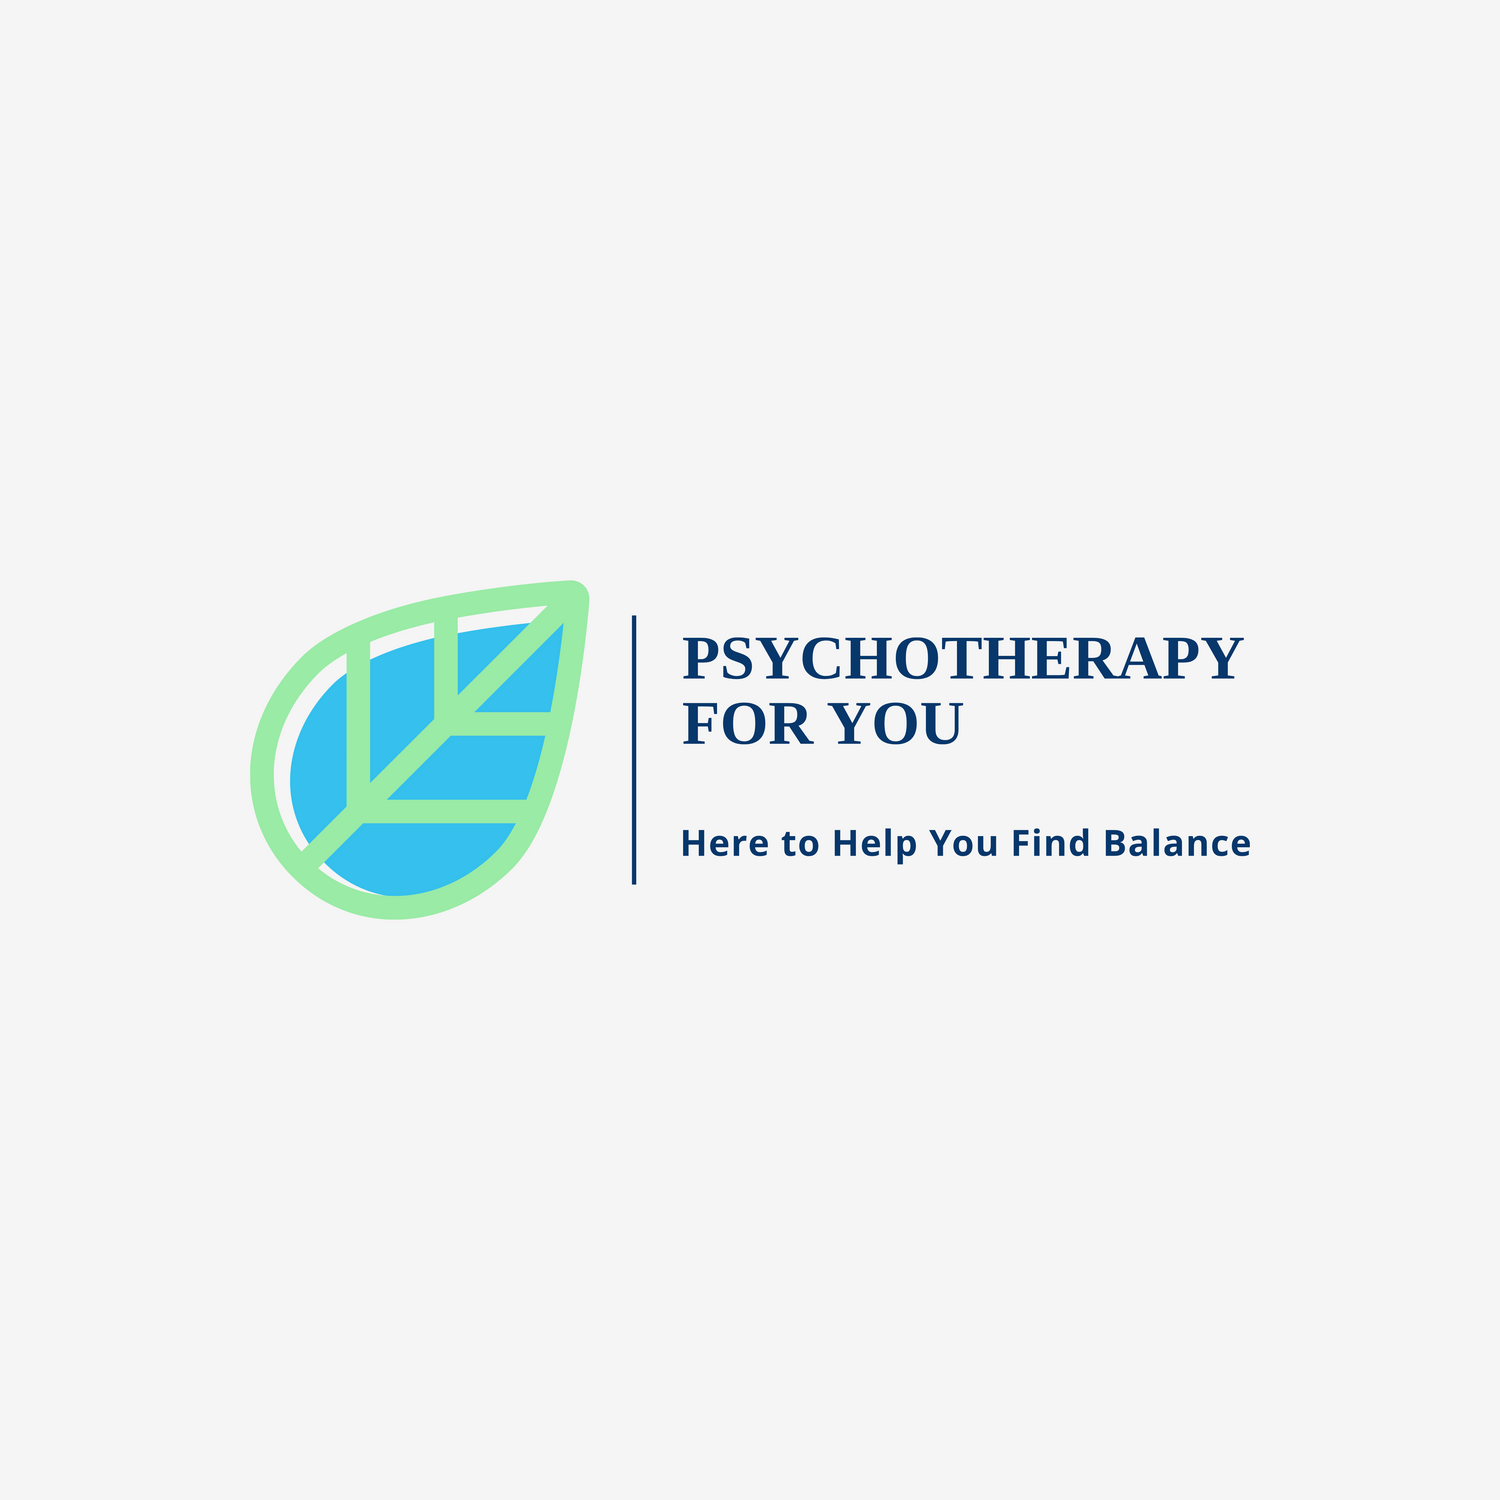 Gallery Photo of Psychotherapy for You
Ontario, Canada

We are here to help you find balance
www.psychotherapyforyou.ca